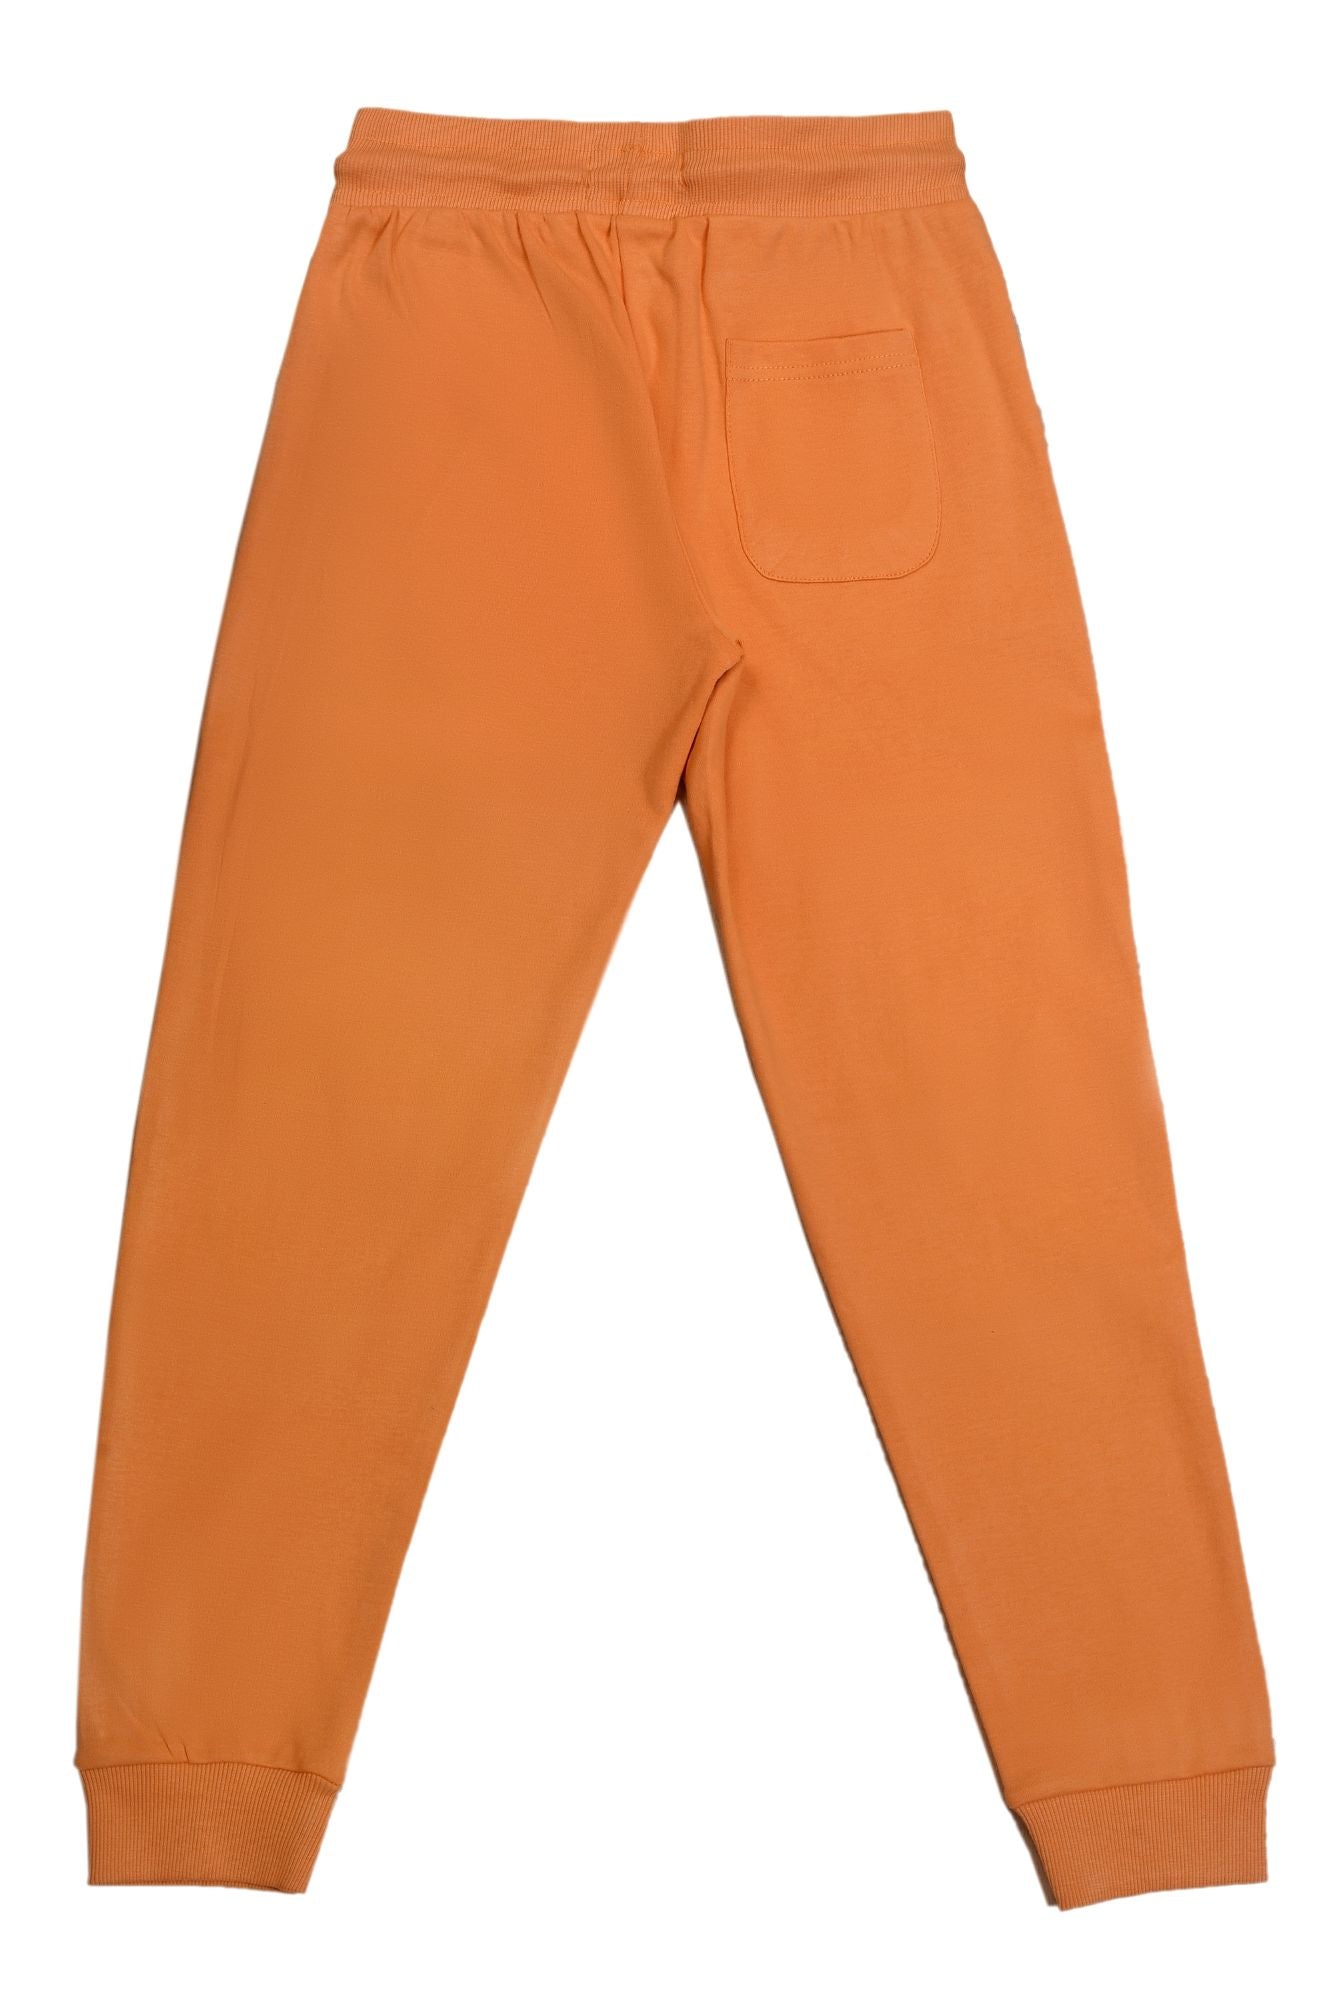 KDS-GC-12416 PULL ON TROUSER PEACH